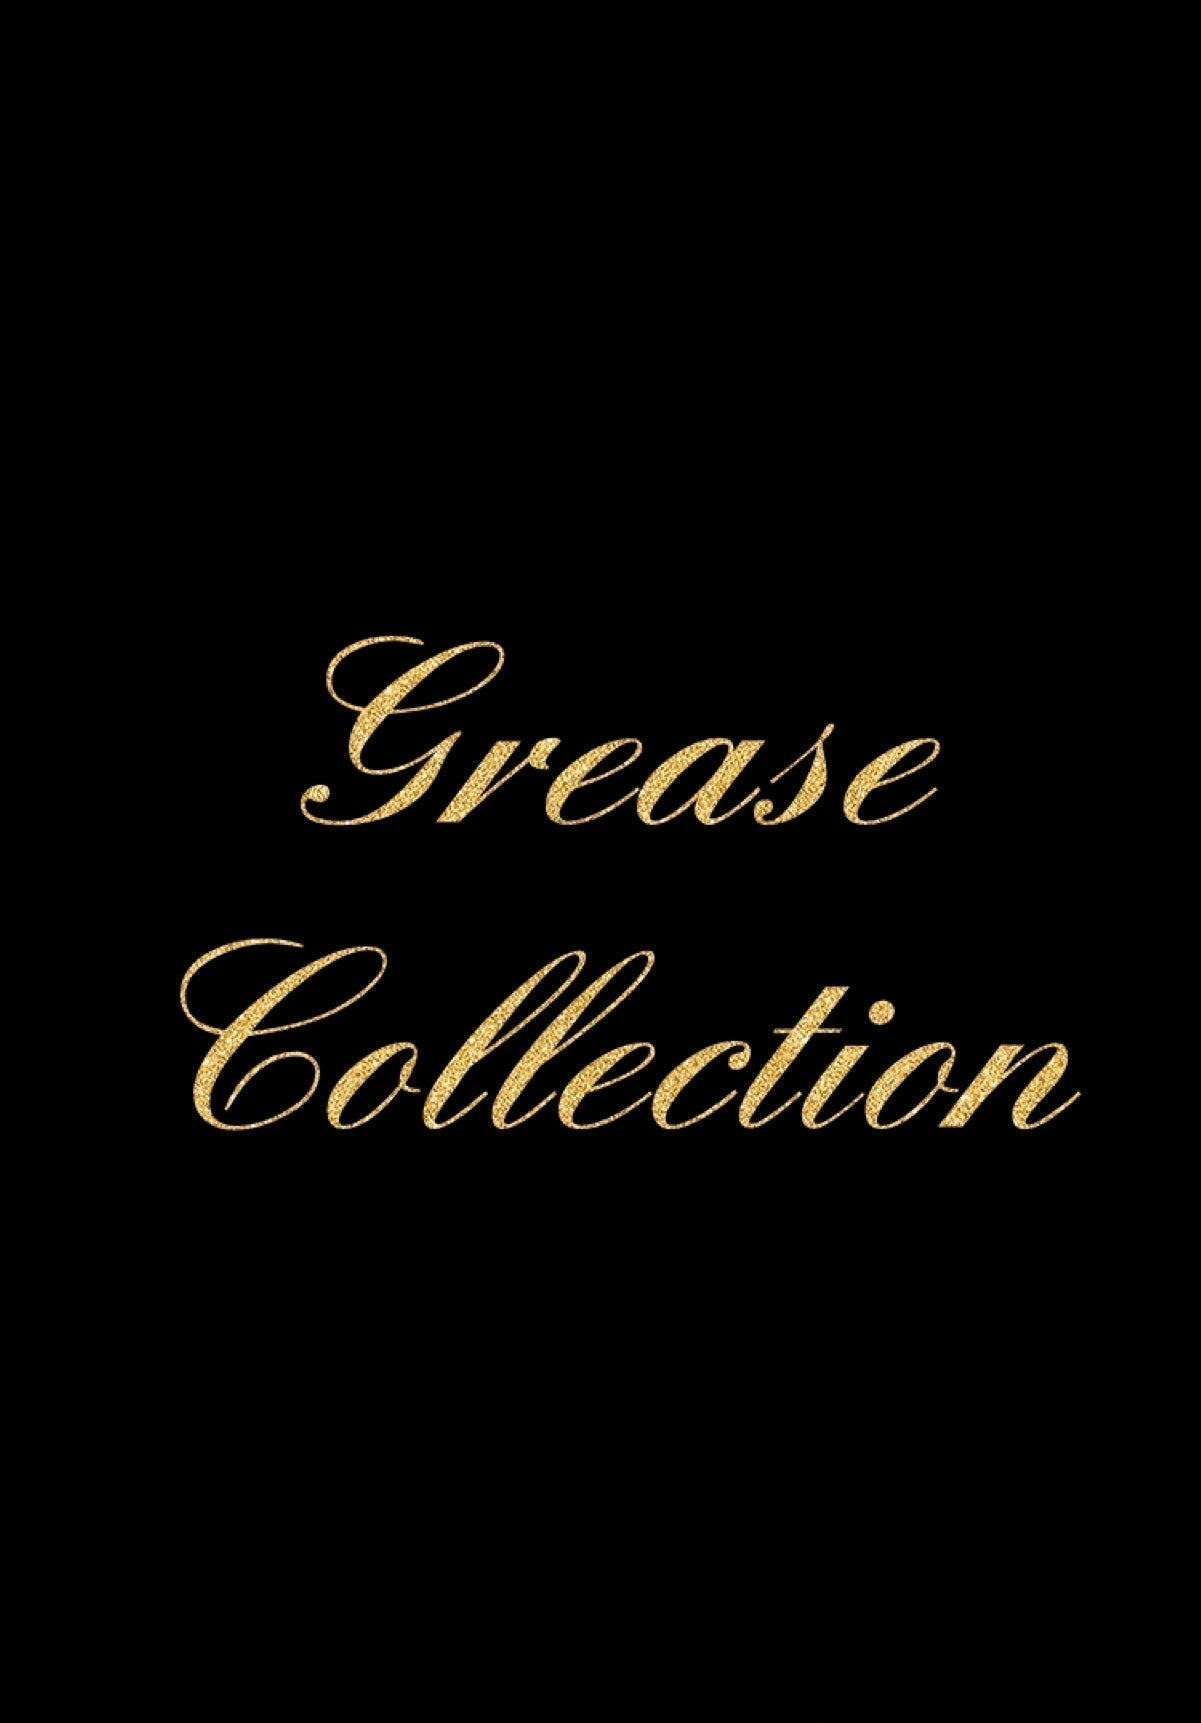 Blanche - Grease Collection